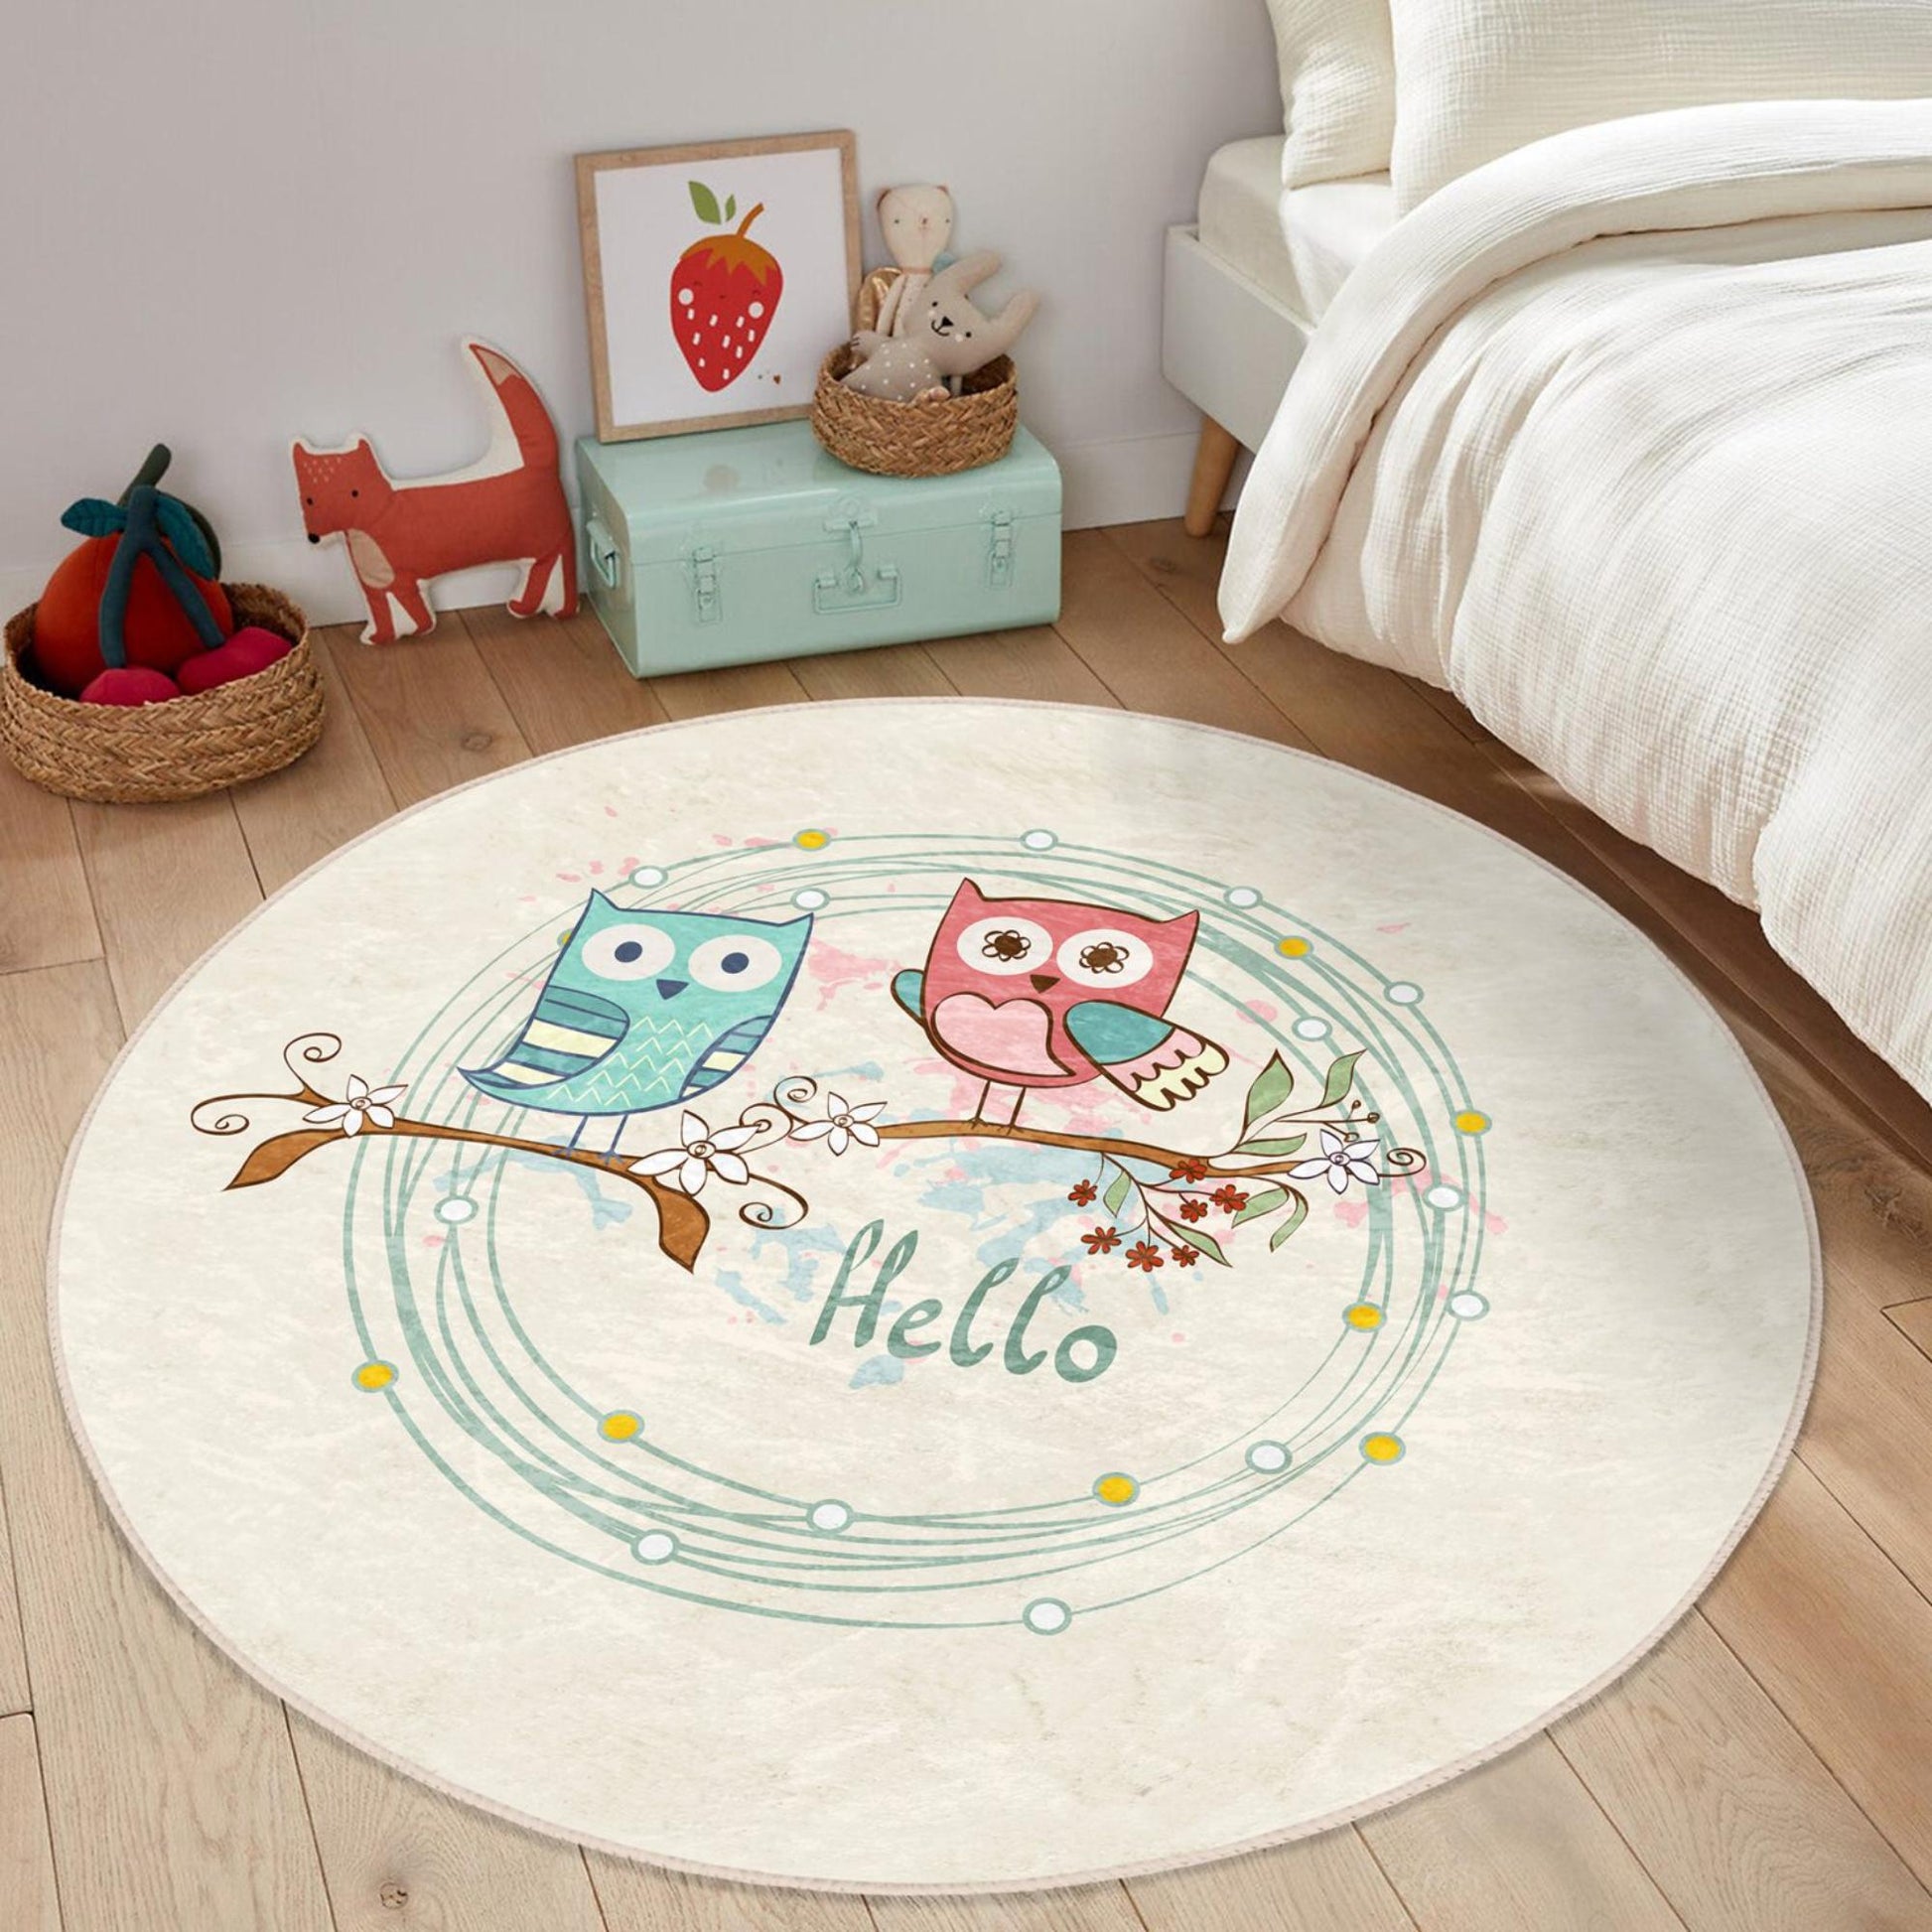 Sweet owl-themed rug with owls on the tree perfect for adding charm to kids' spaces.